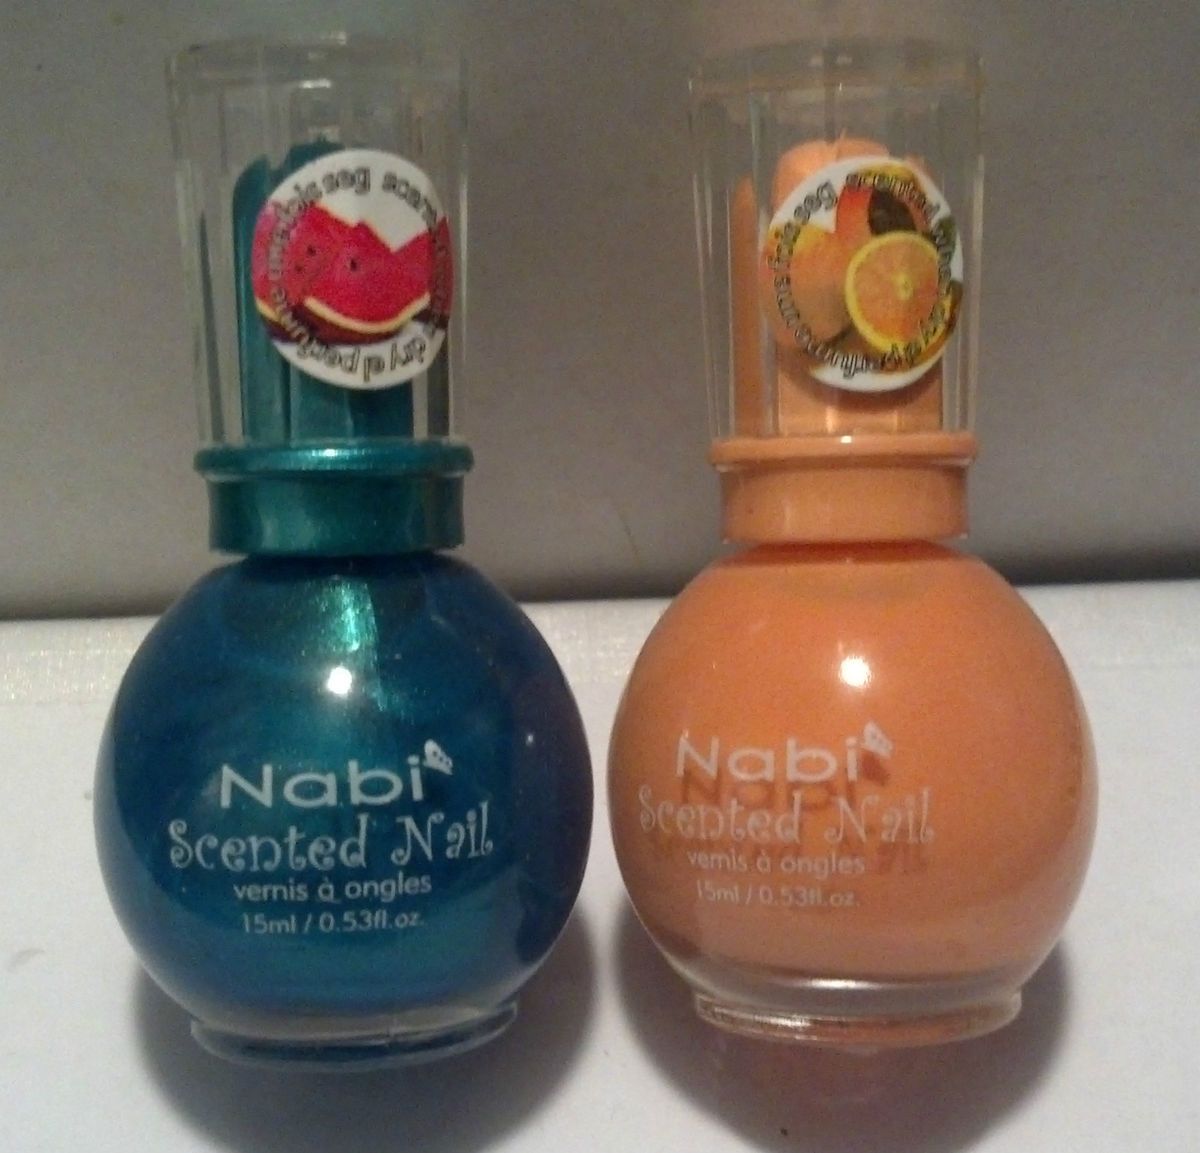 Lot of 2 New Scented Nail Polish by Nabi Teal Blue and Light Orange